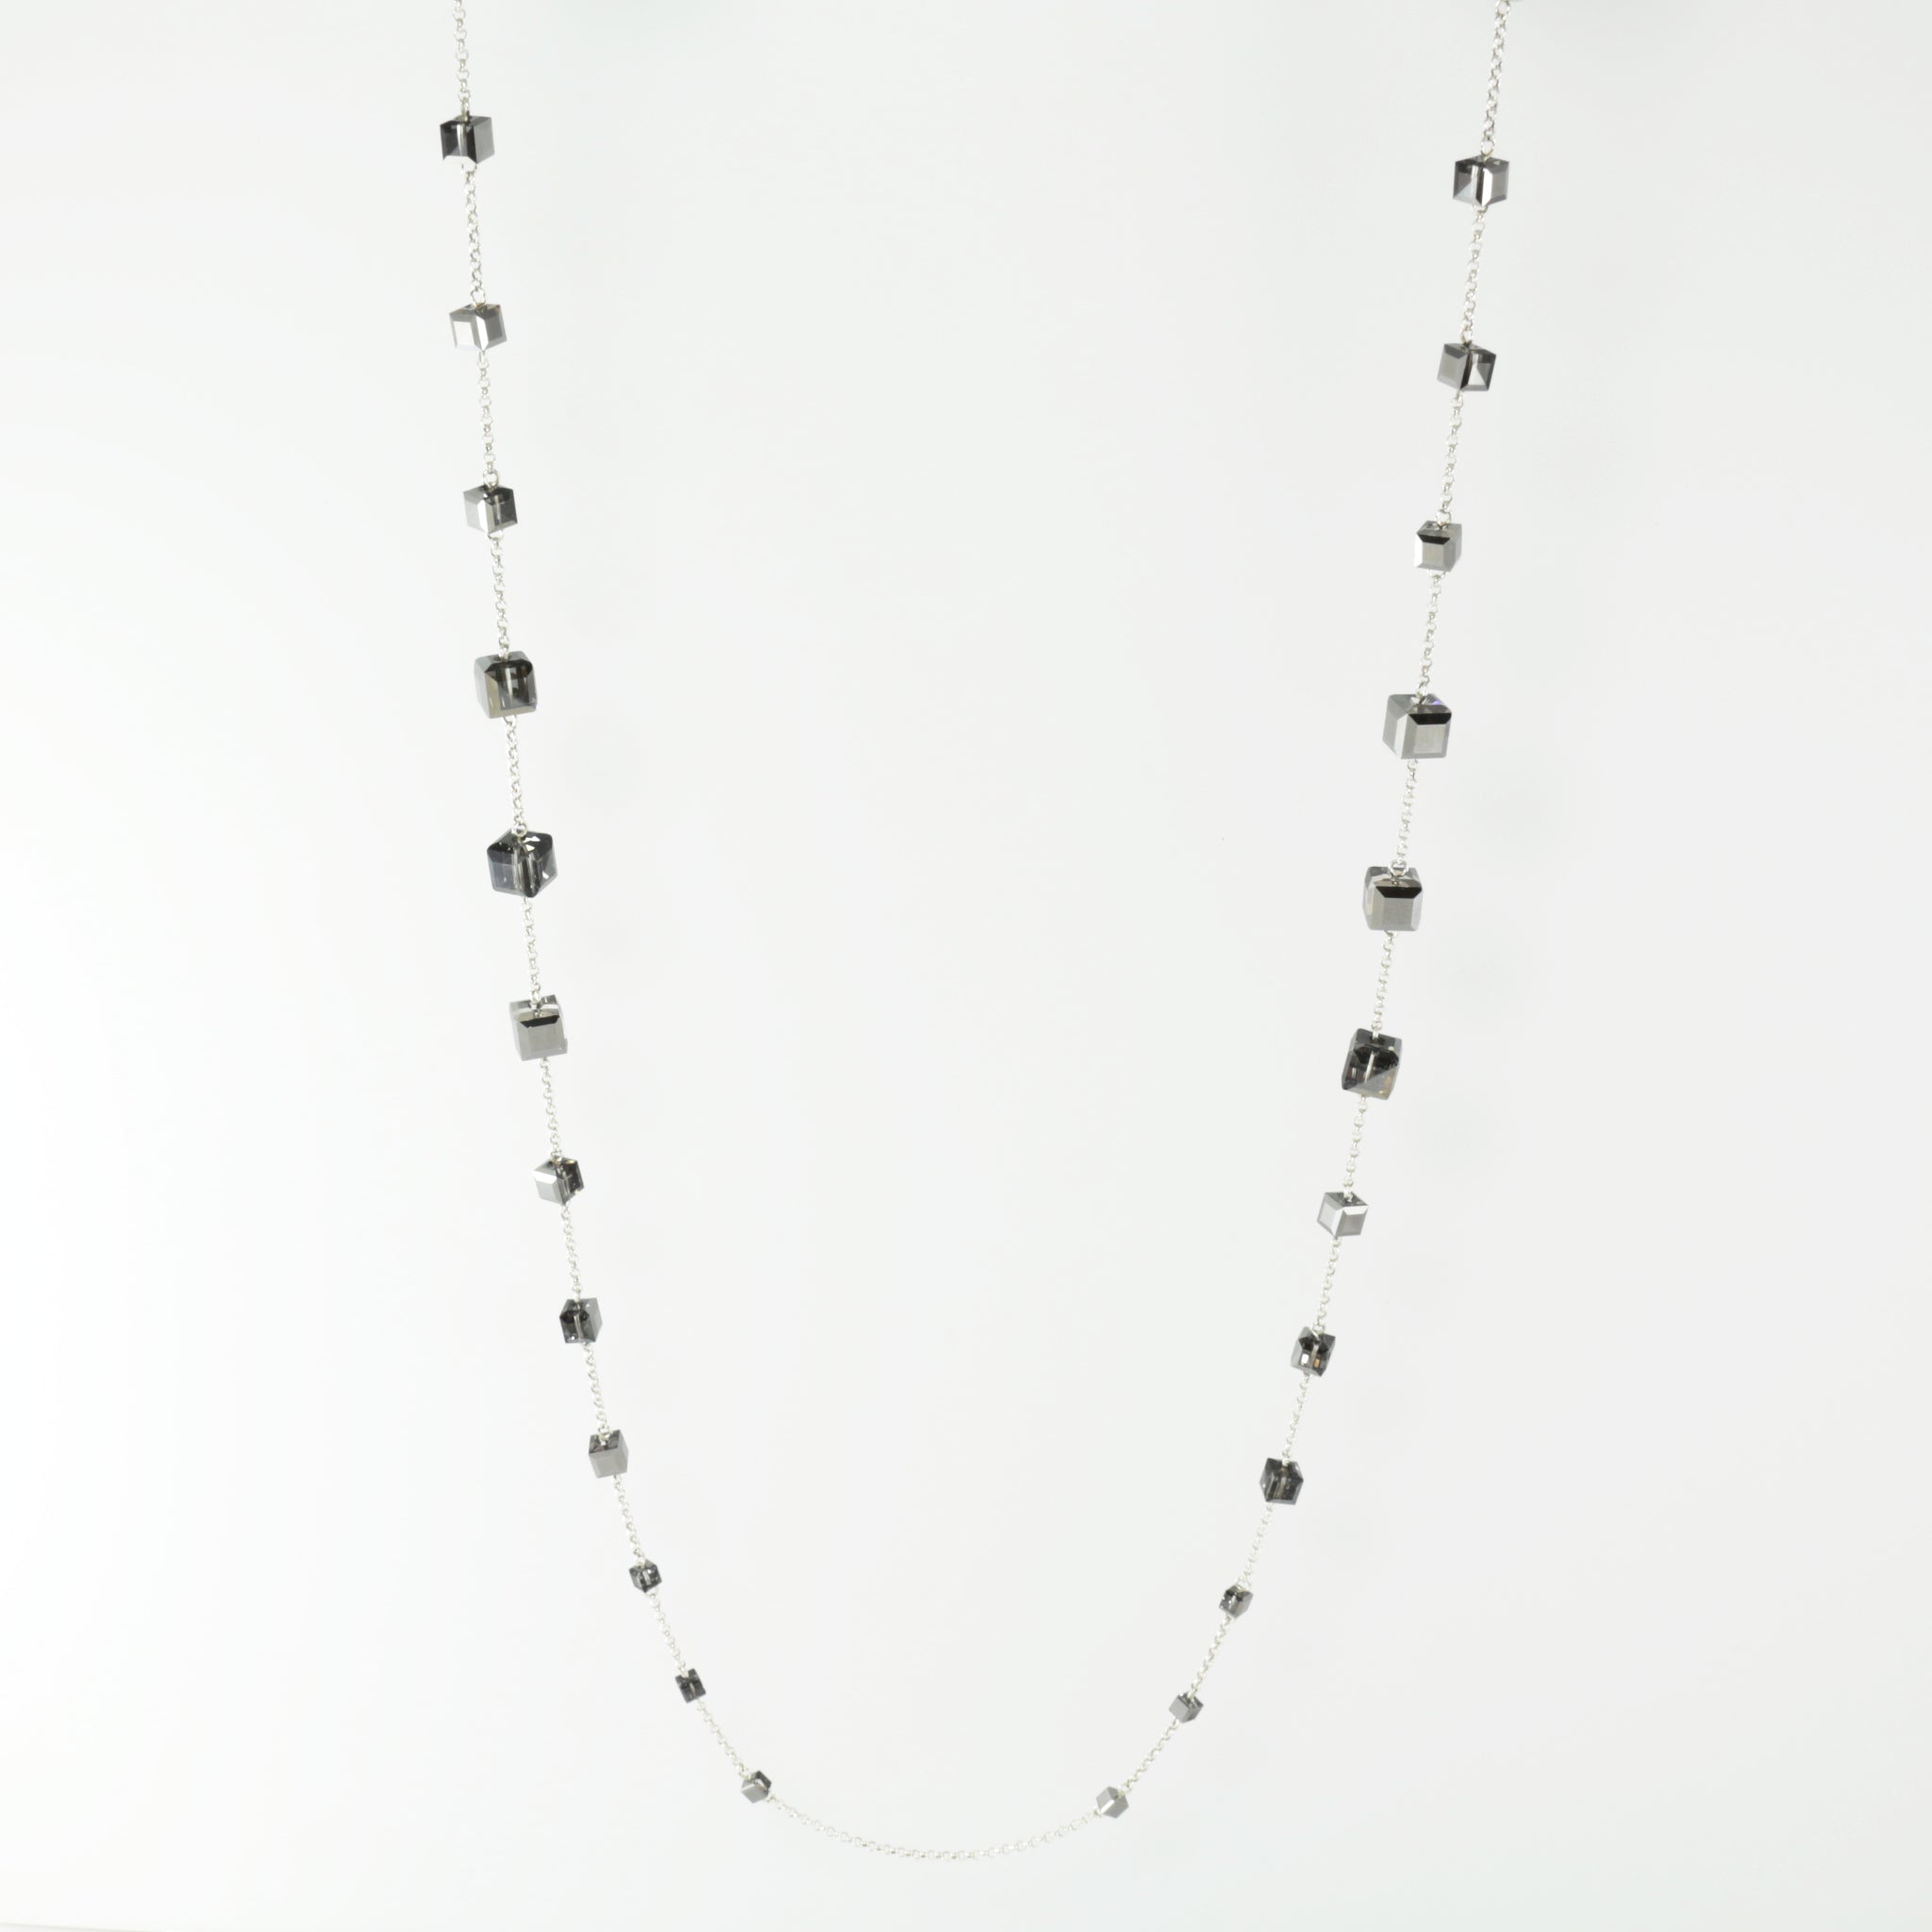 Windows Change-ABLE Necklace in Silver Black